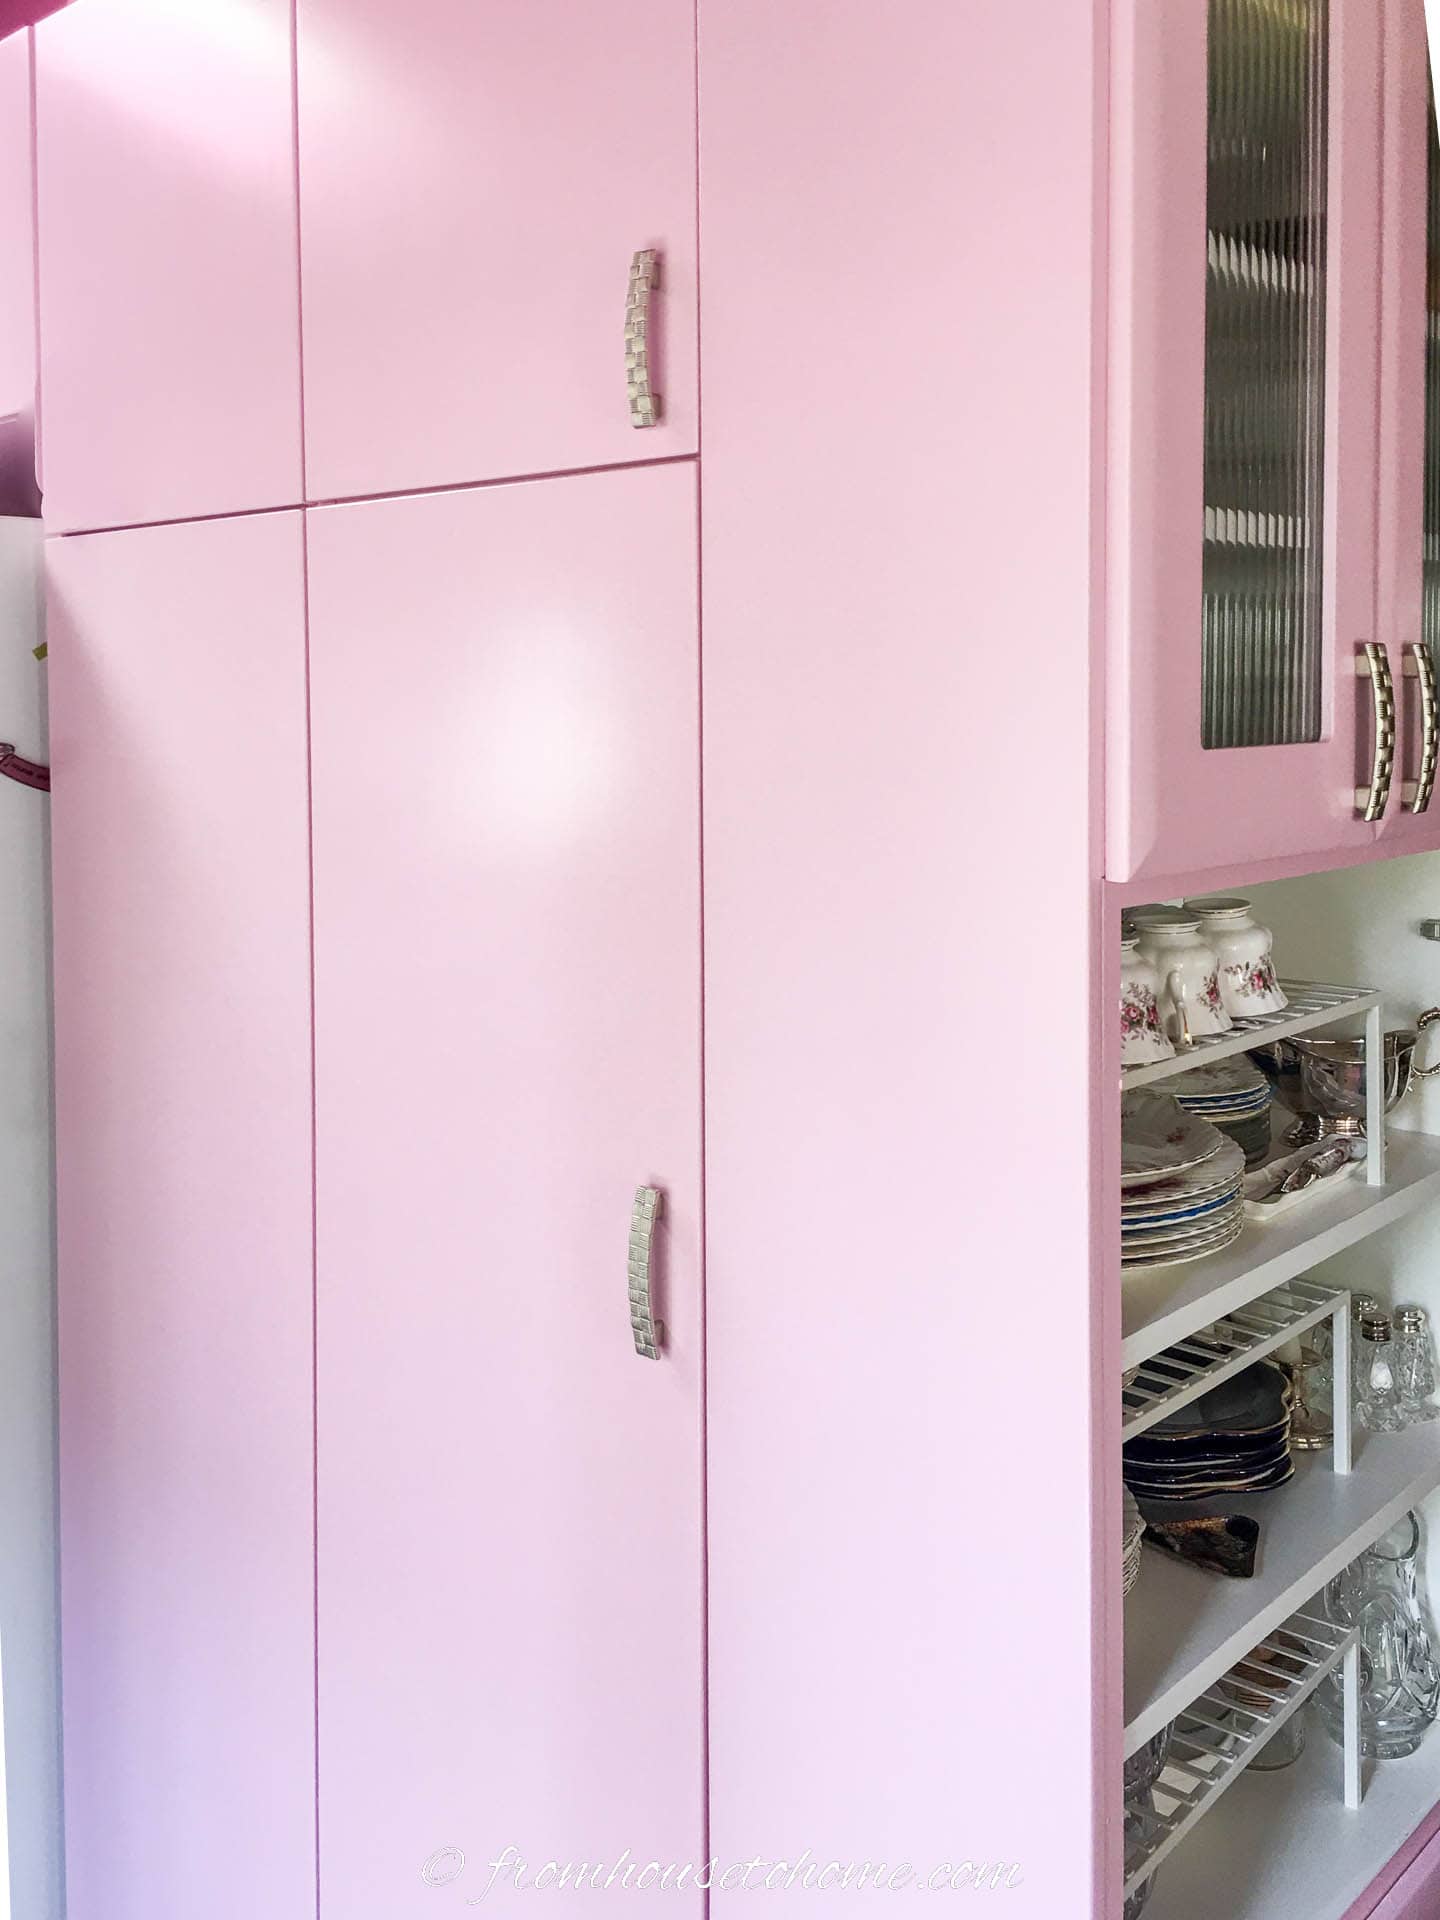 IKEA pantry cabinets painted light pink with pewter cabinet handles